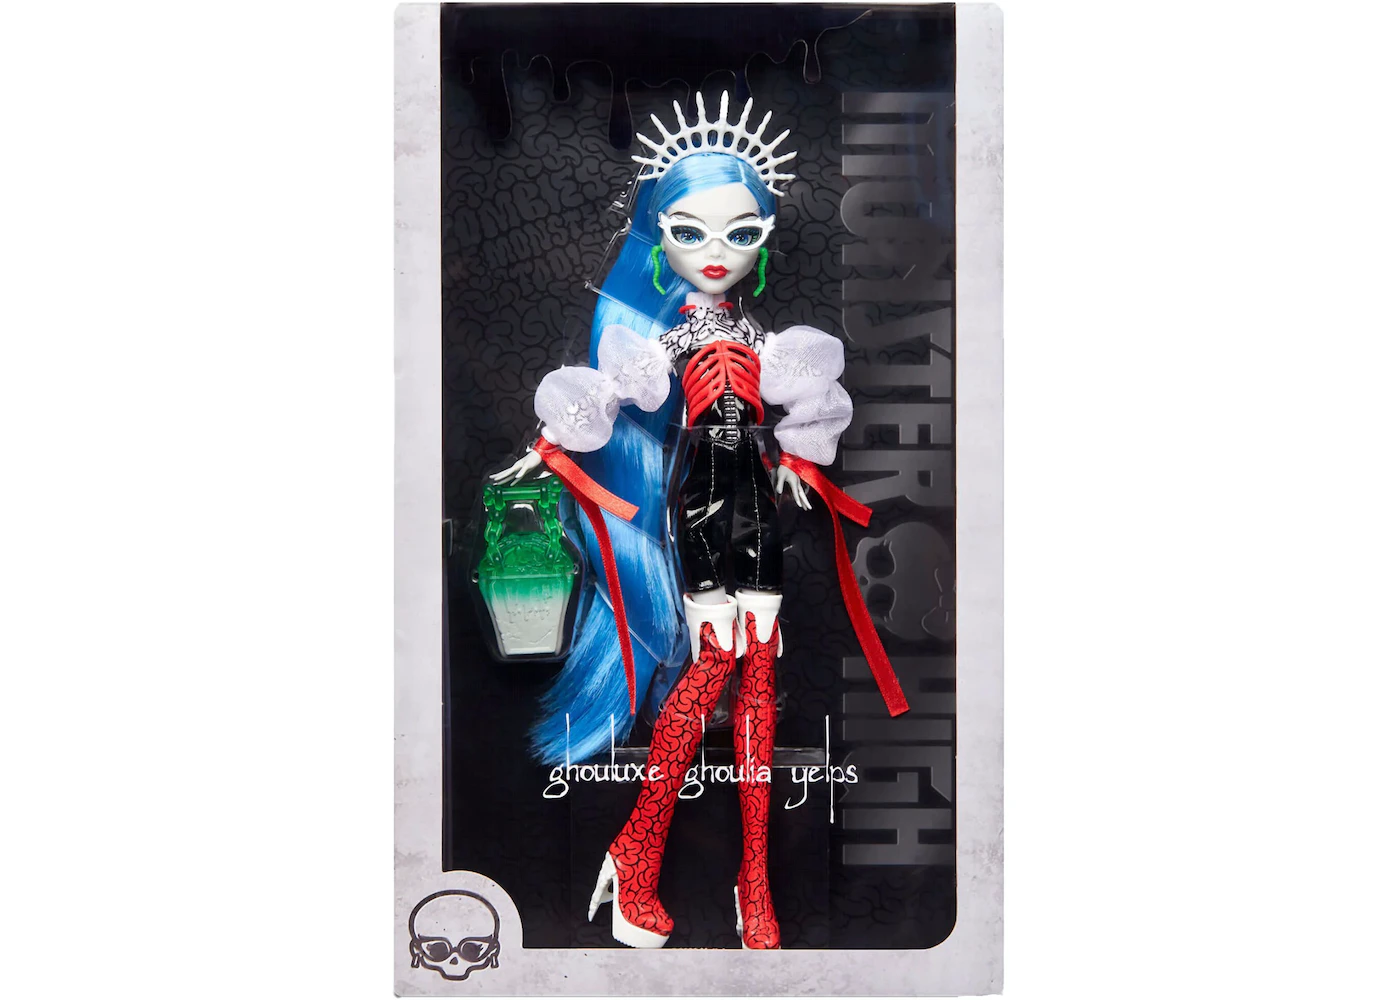 Mattel Monster High Collectors Ghouluxe Ghoulia Yelps Doll - SS23 - US